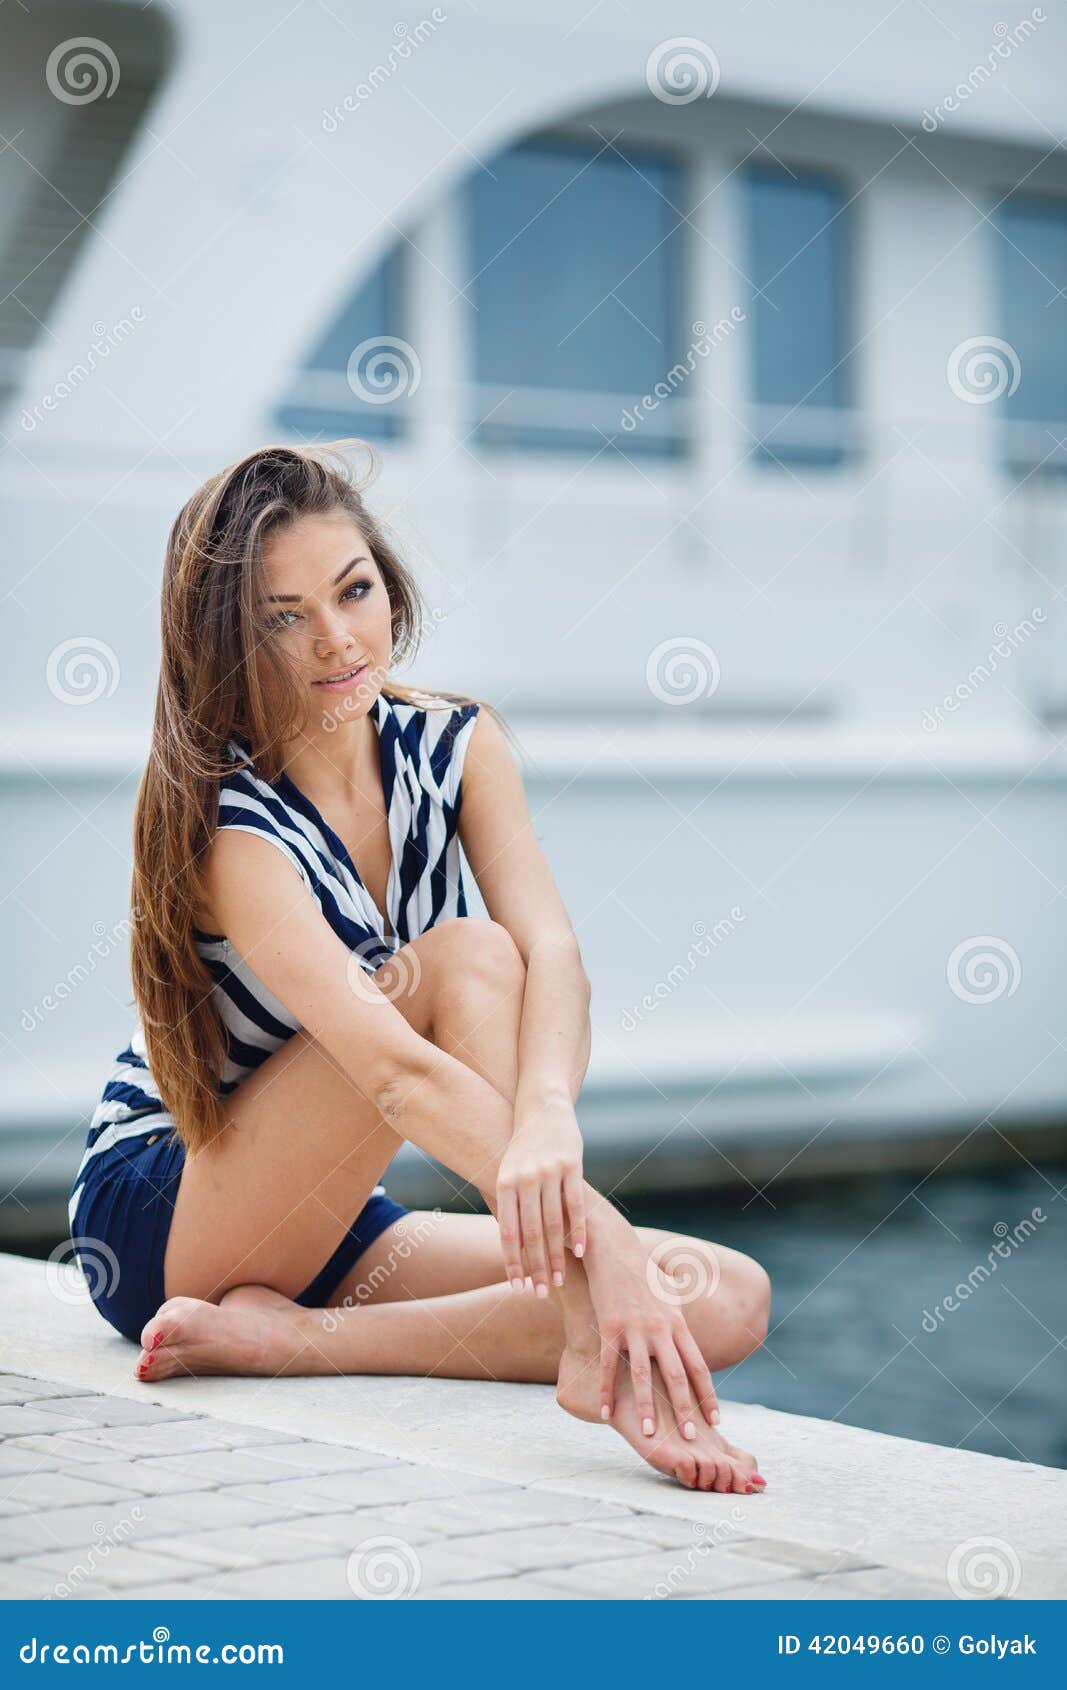 portrait of the girl against the sea and yachts stock